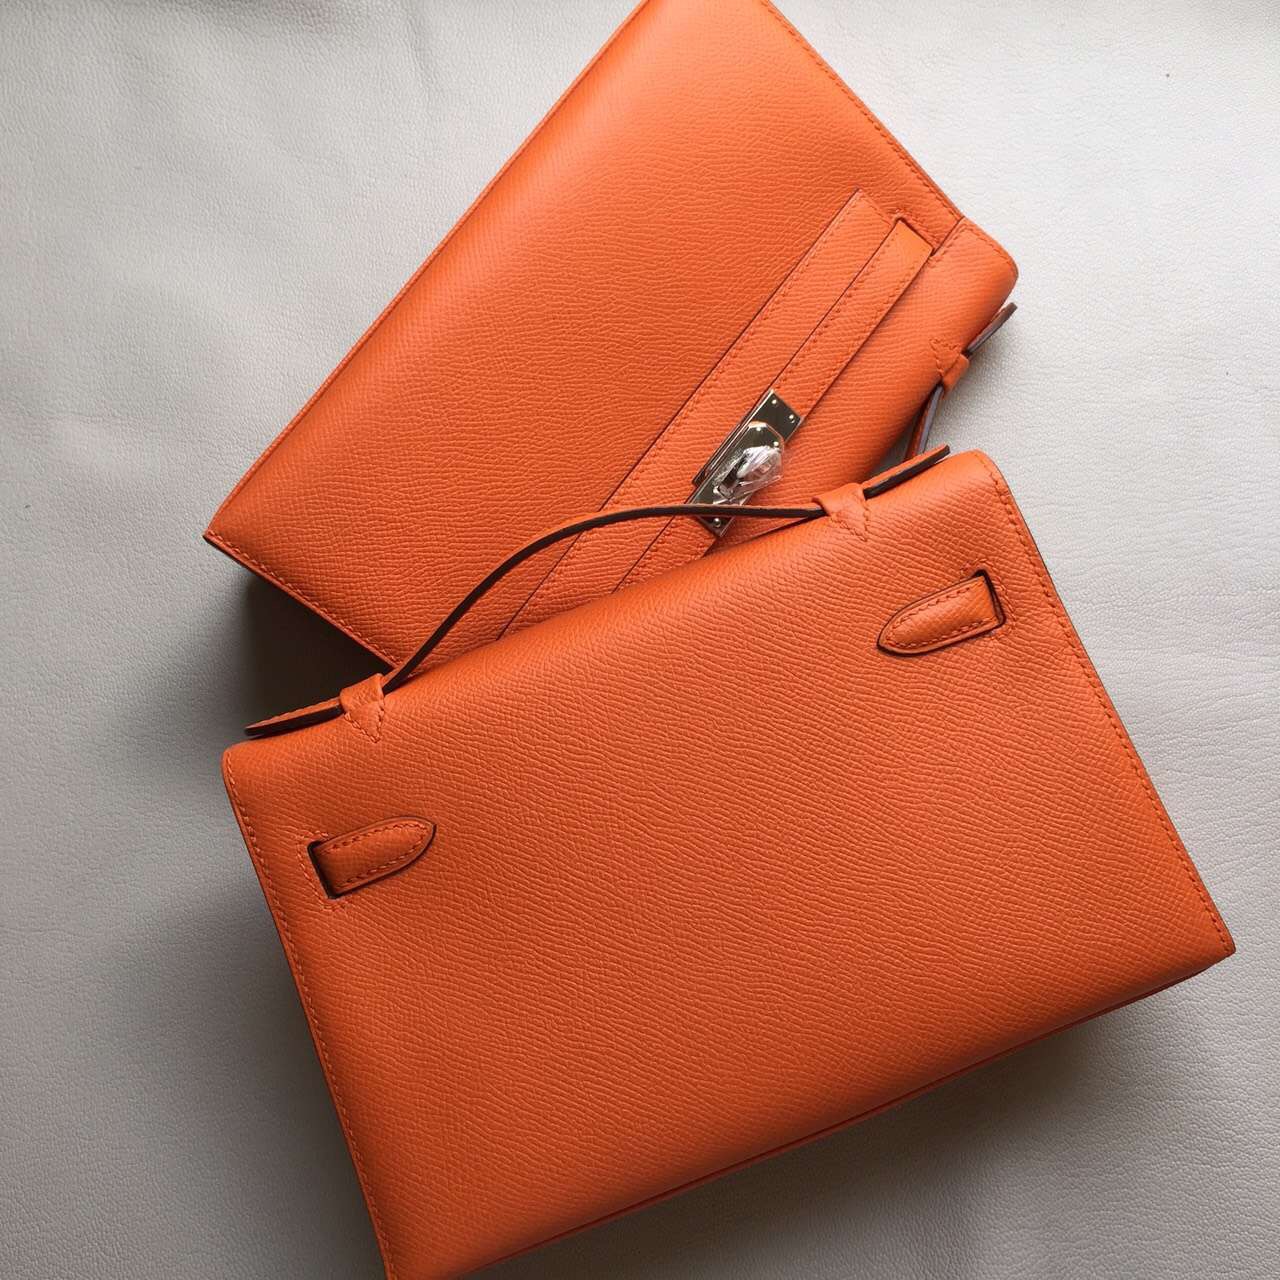 Discount Hermes Epsom Leather Minikelly Clutch Bag 22cm in  93 Orange